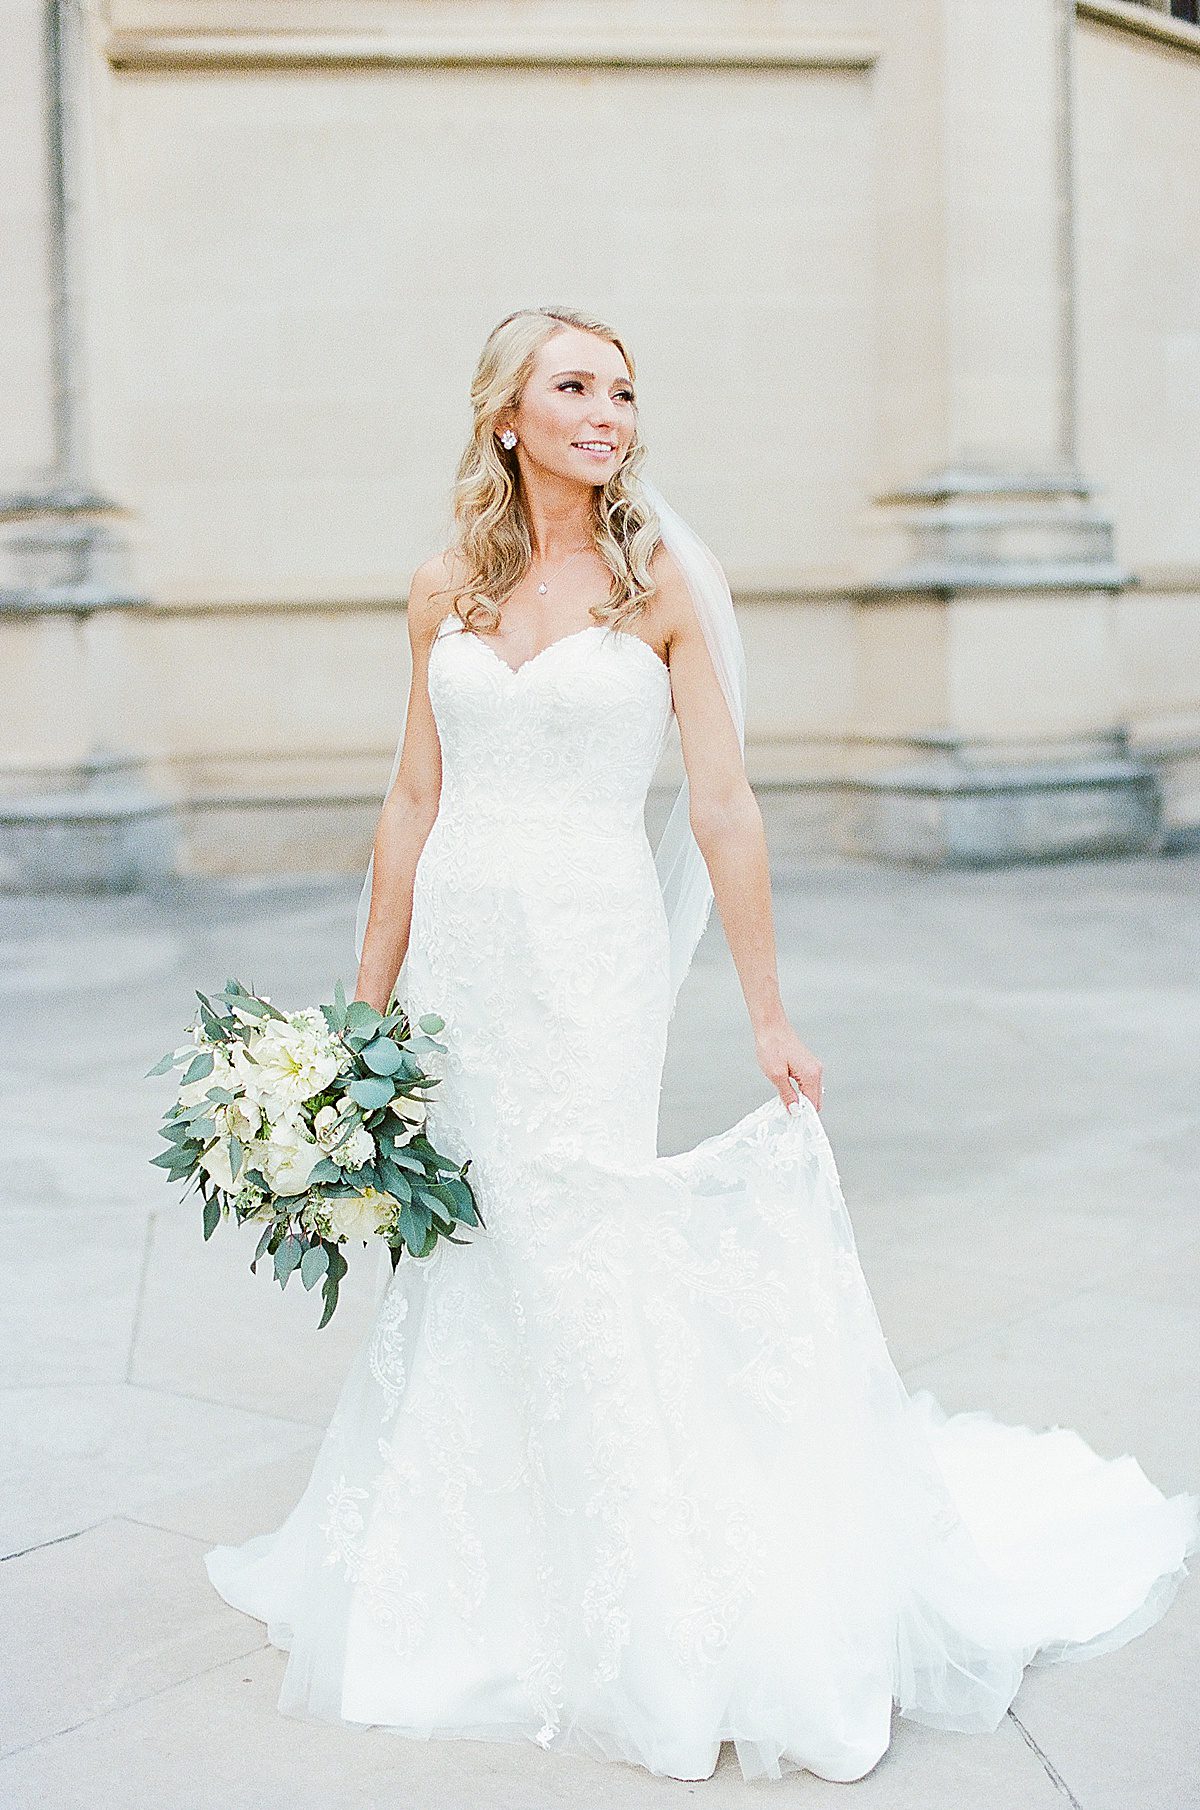 Biltmore Estate Bride Looking off in Maggie Sottero Designs Gown Photo